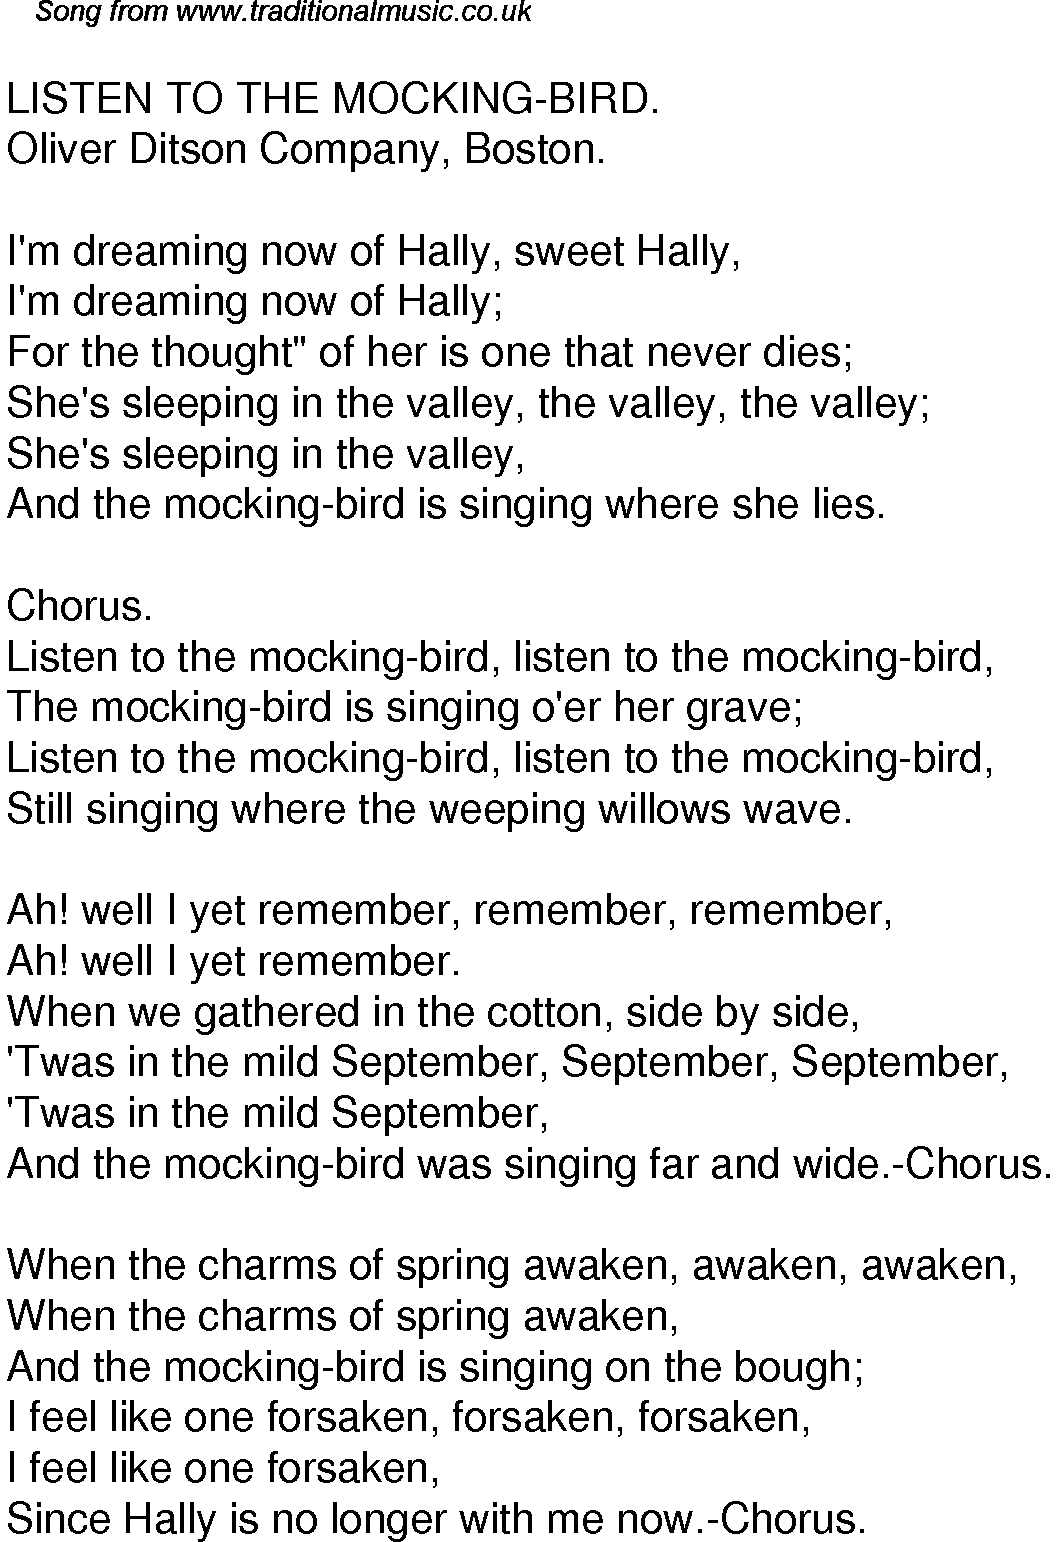 Old Time Song Lyrics for 59 Listen To The Mockingbird